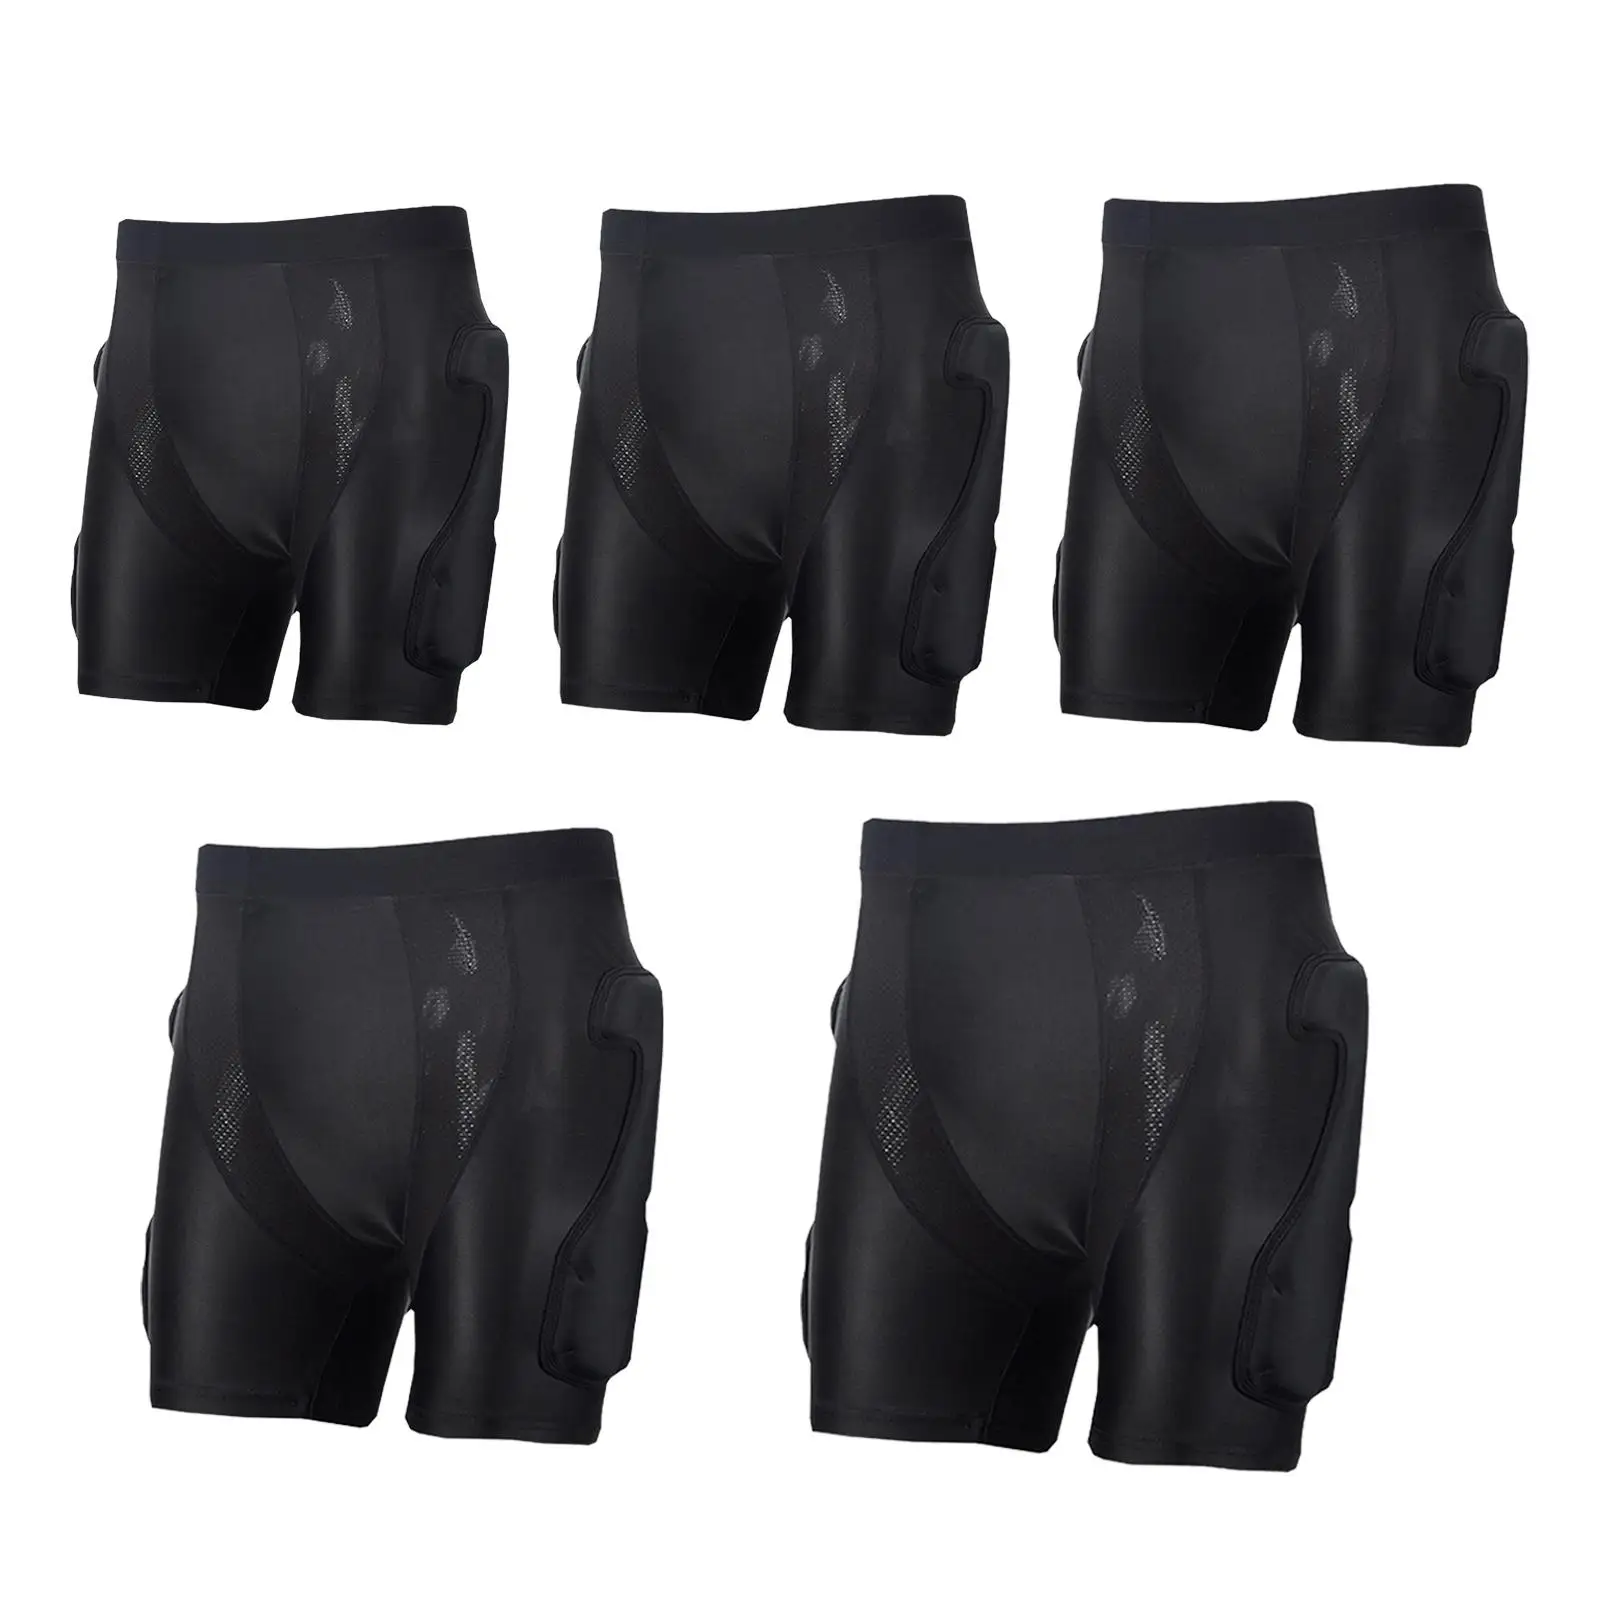 Padded Shorts Skid Hip Pad Multifunction Impact Resistance Protector for Roller Skating Outdoor Sports Skiing Snowboard Black